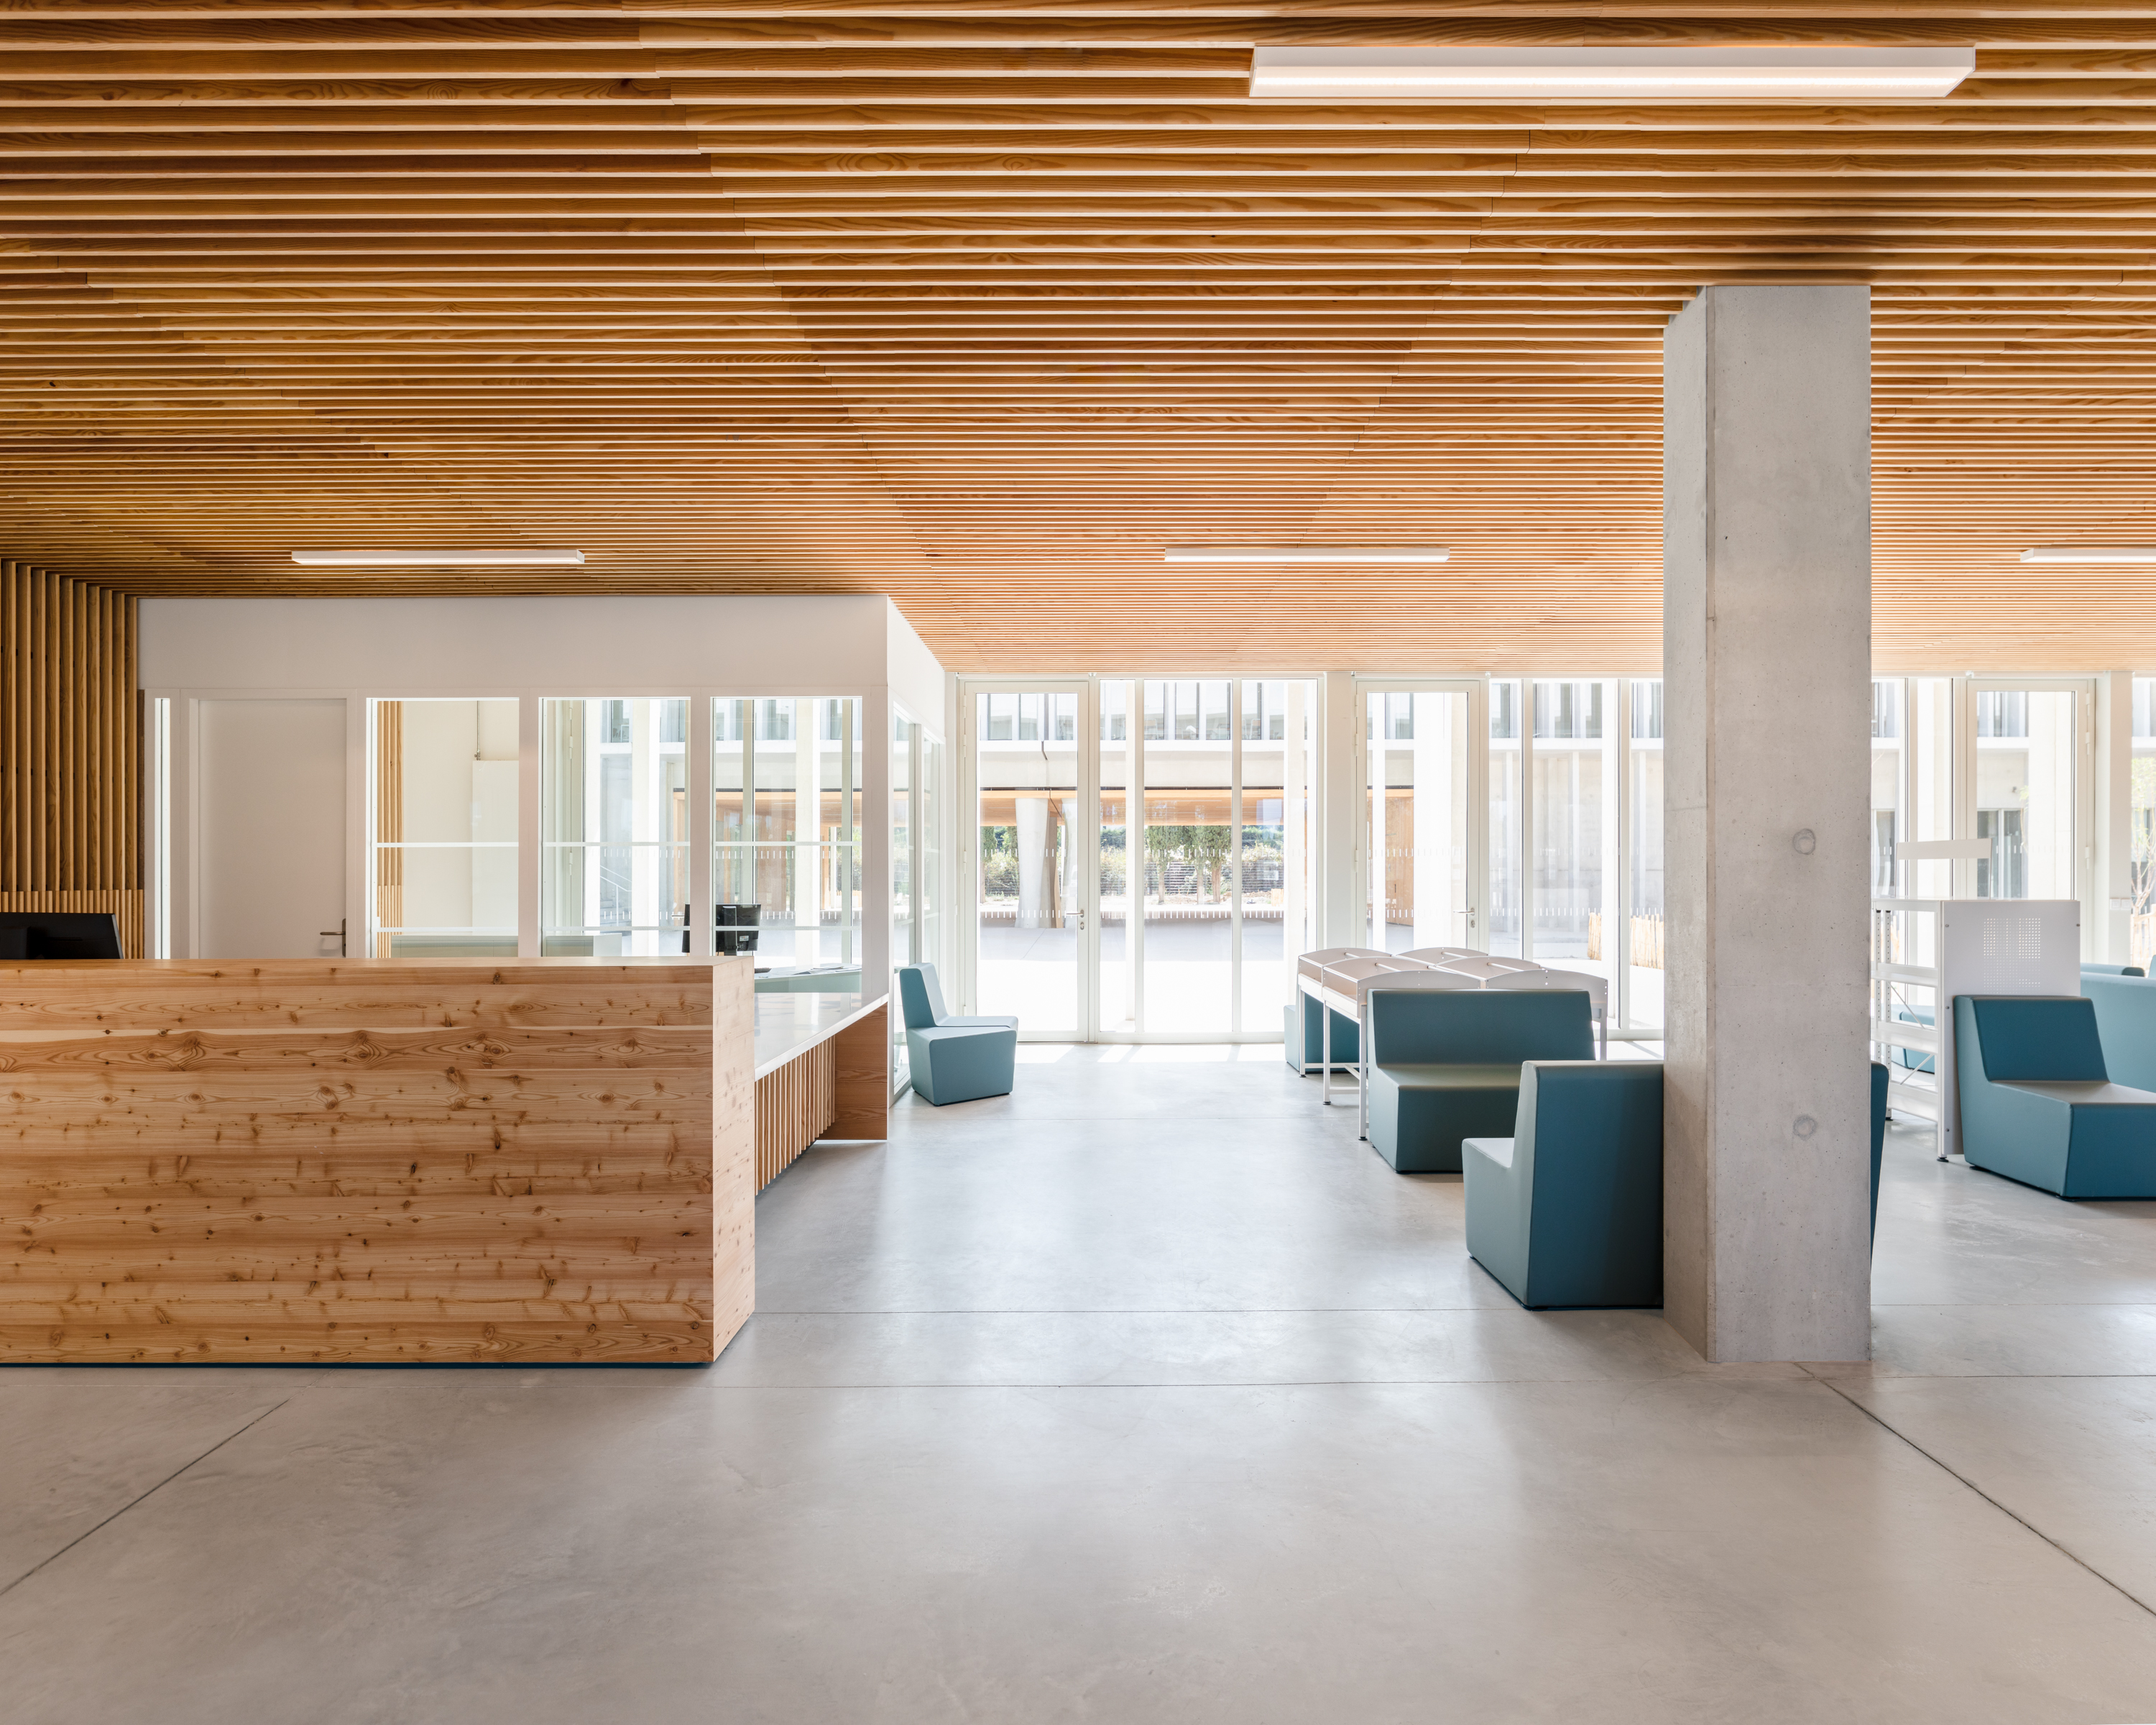 Laudescher’s wood solutions perfect the ethereal and rhythmic architectural composition of the Châteaurenard High School-5